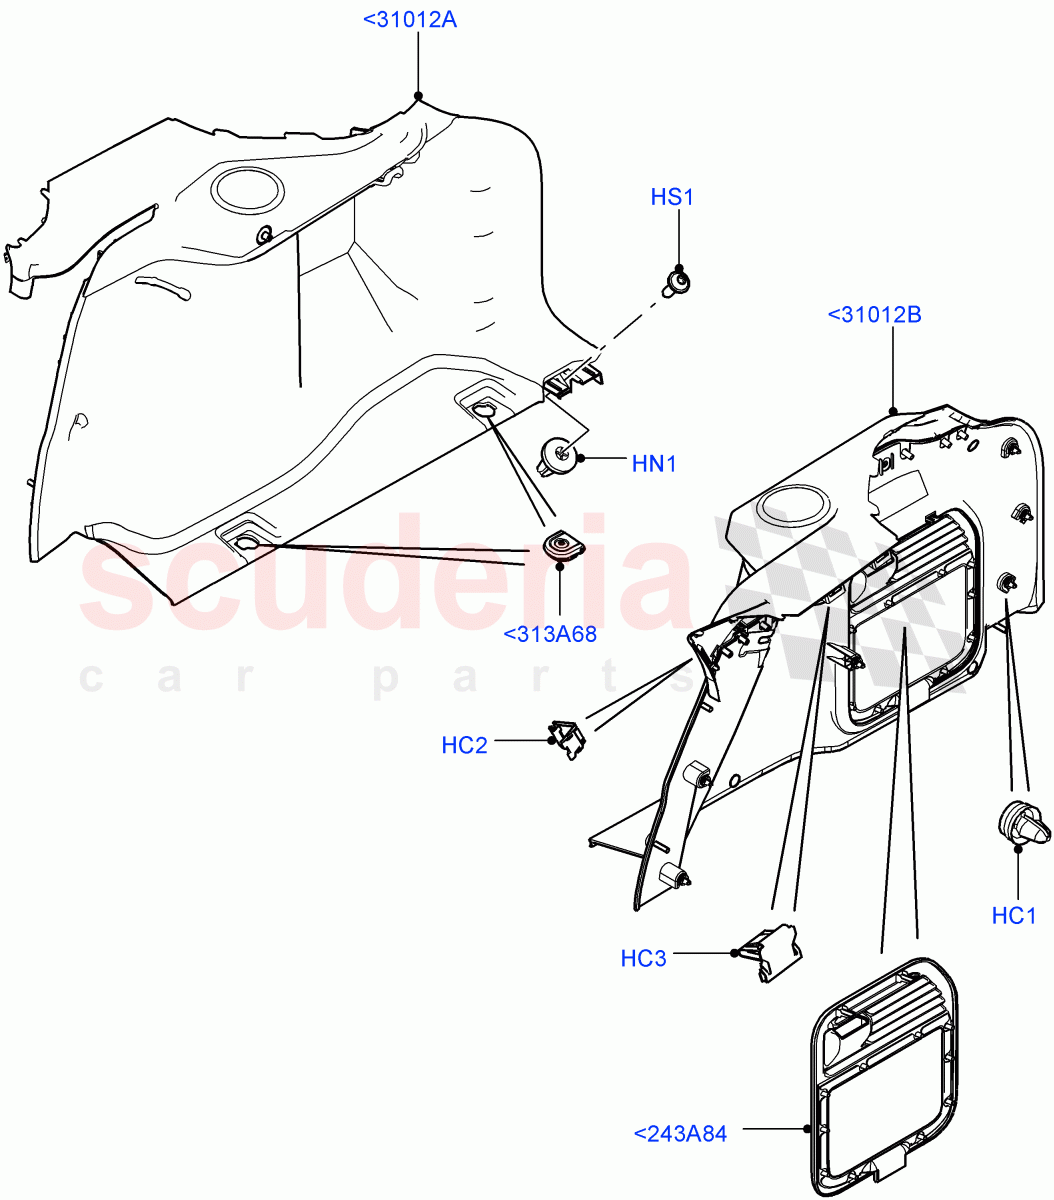 Side Trim(Luggage Compartment)(Itatiaia (Brazil))((V)FROMGT000001) of Land Rover Land Rover Range Rover Evoque (2012-2018) [2.0 Turbo Diesel]